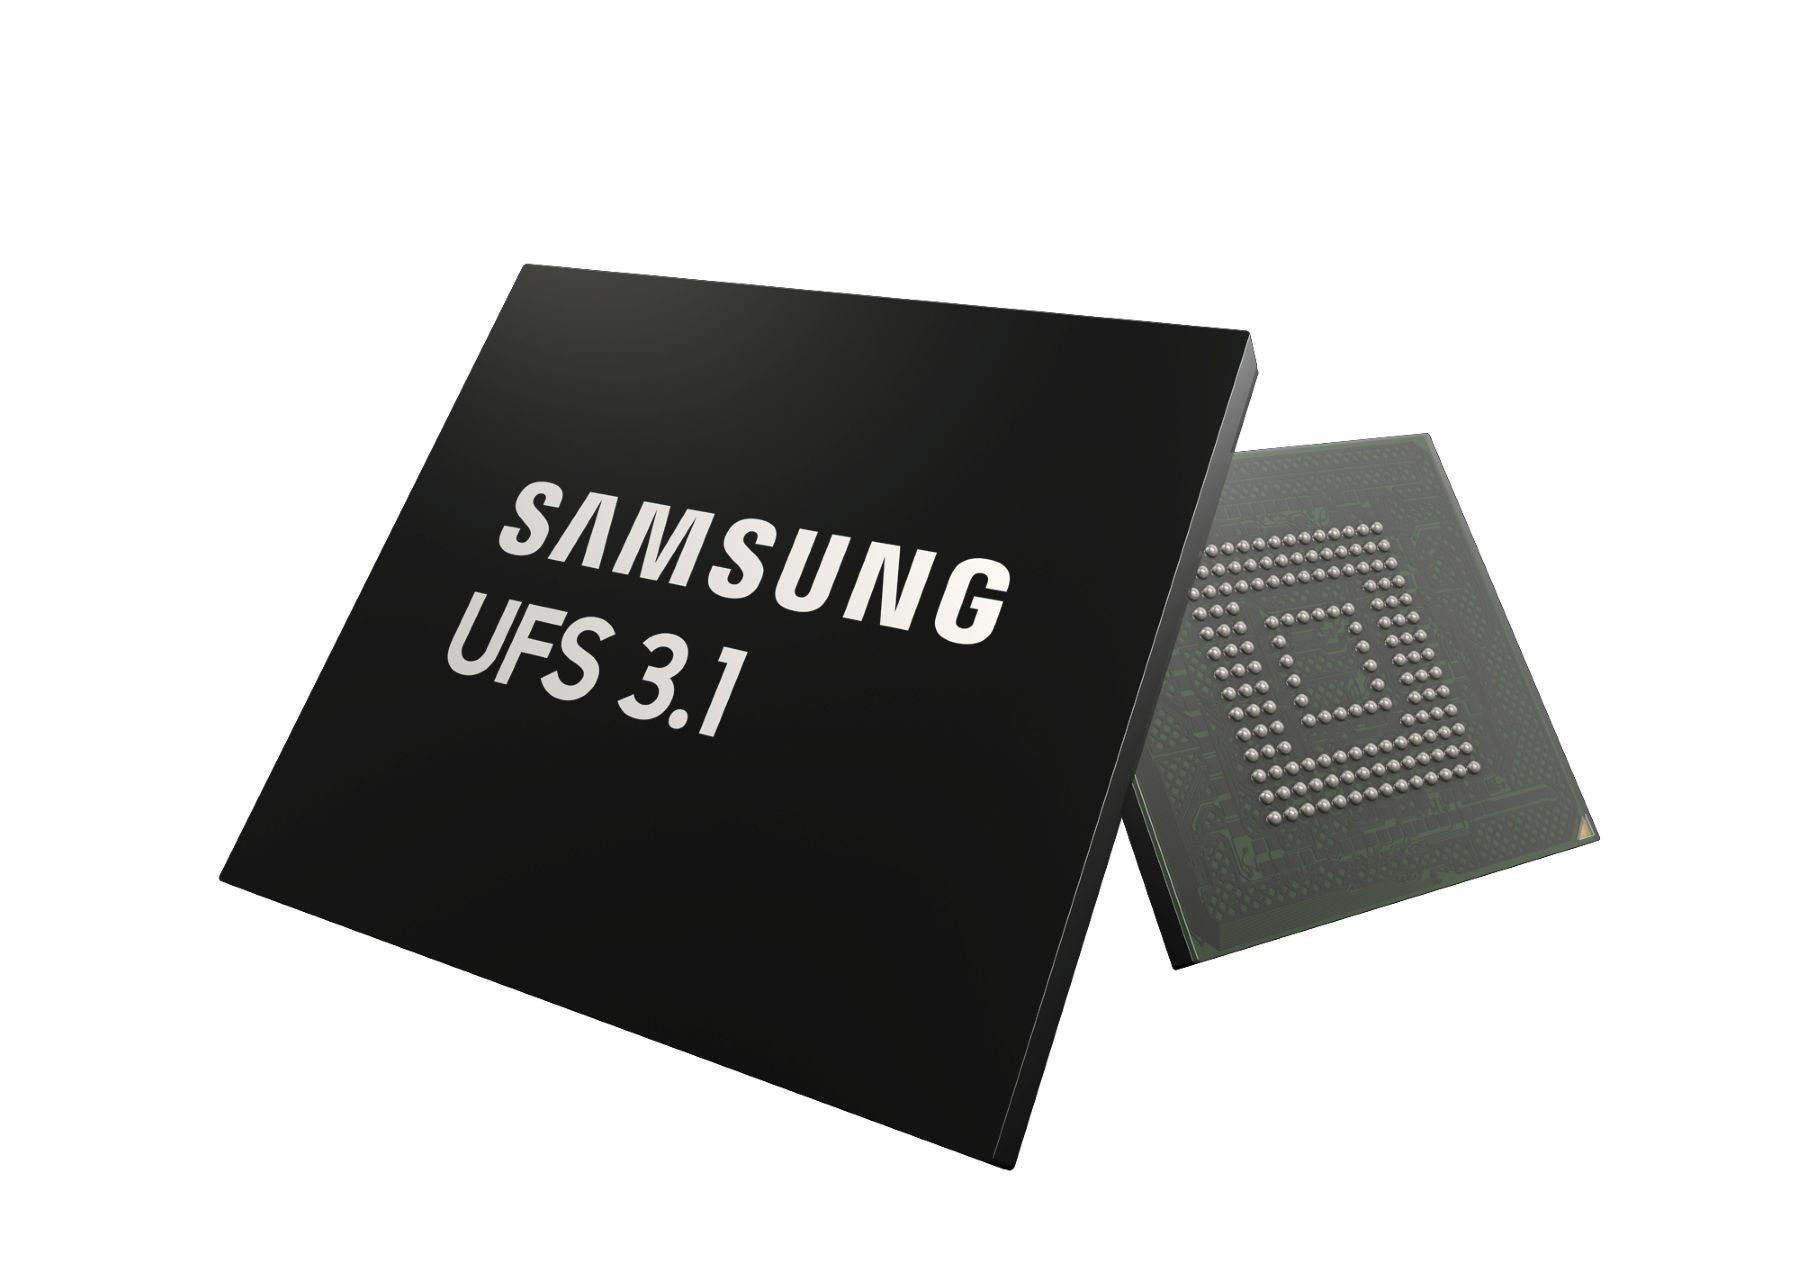 Samsung Starts Mass Production of Automotive UFS 3.1 Memory Solution with Industry’s Lowest Power Consumption